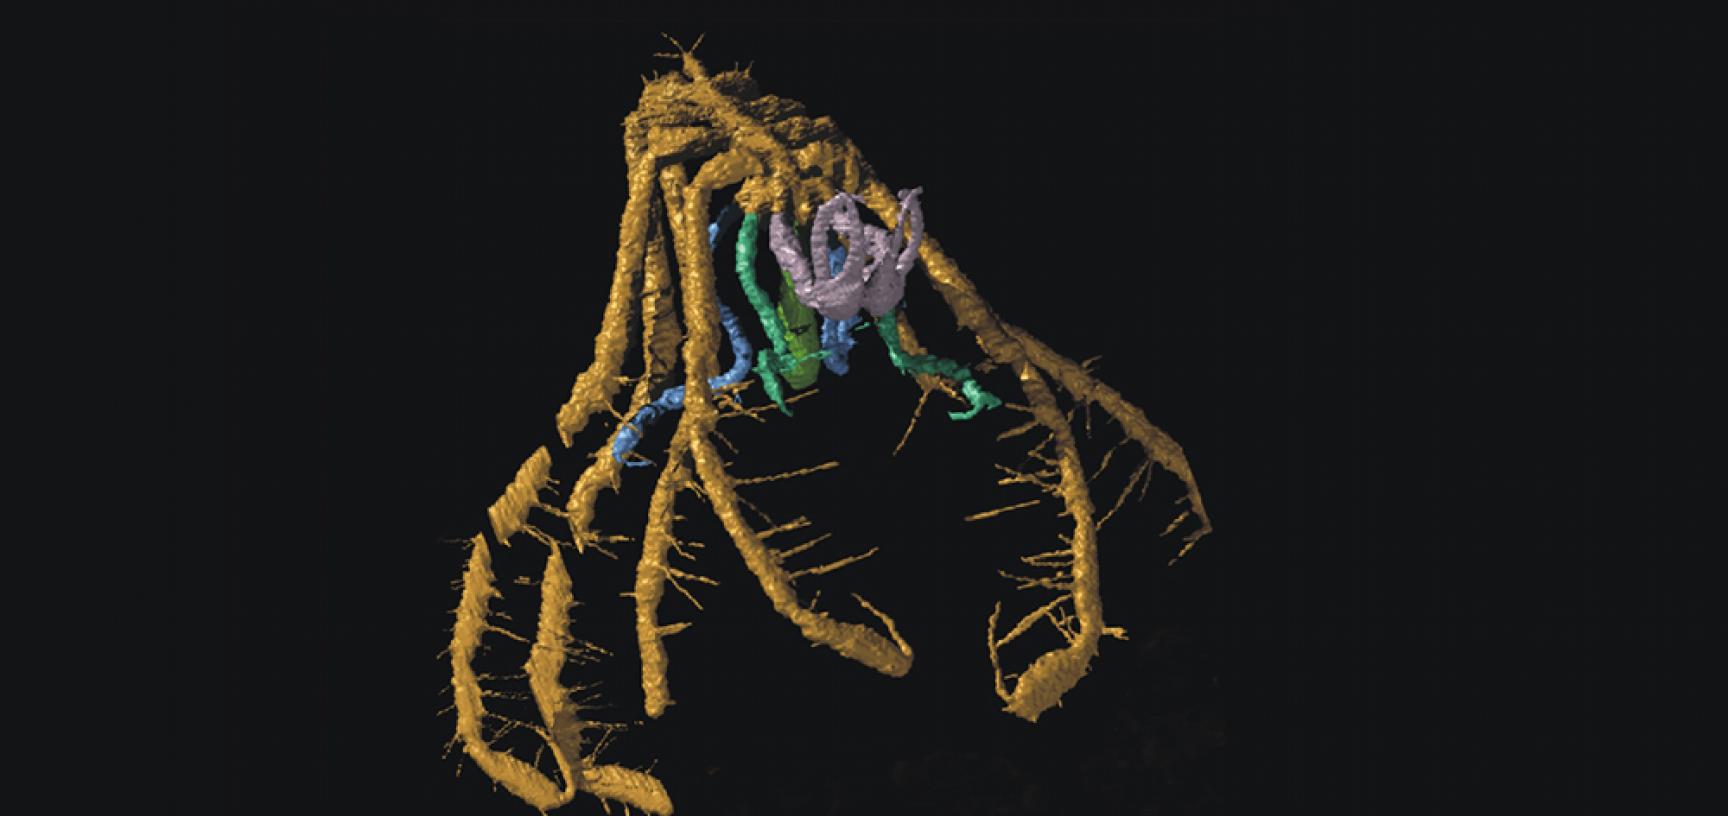 A fossil sea spider, pycnogonid arthropod, from the Silurian of Herefordshire, UK